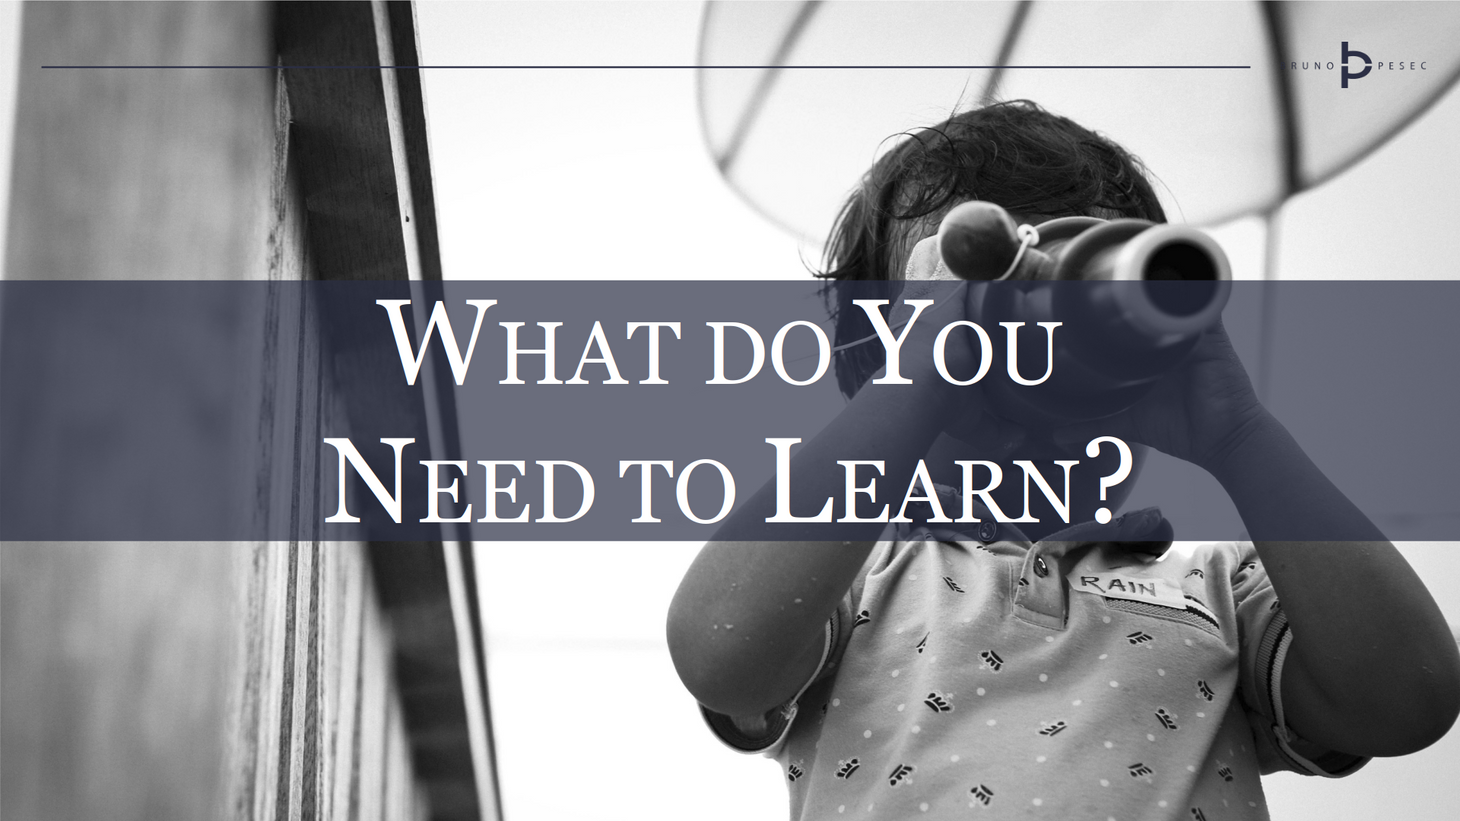 What do you need to learn?